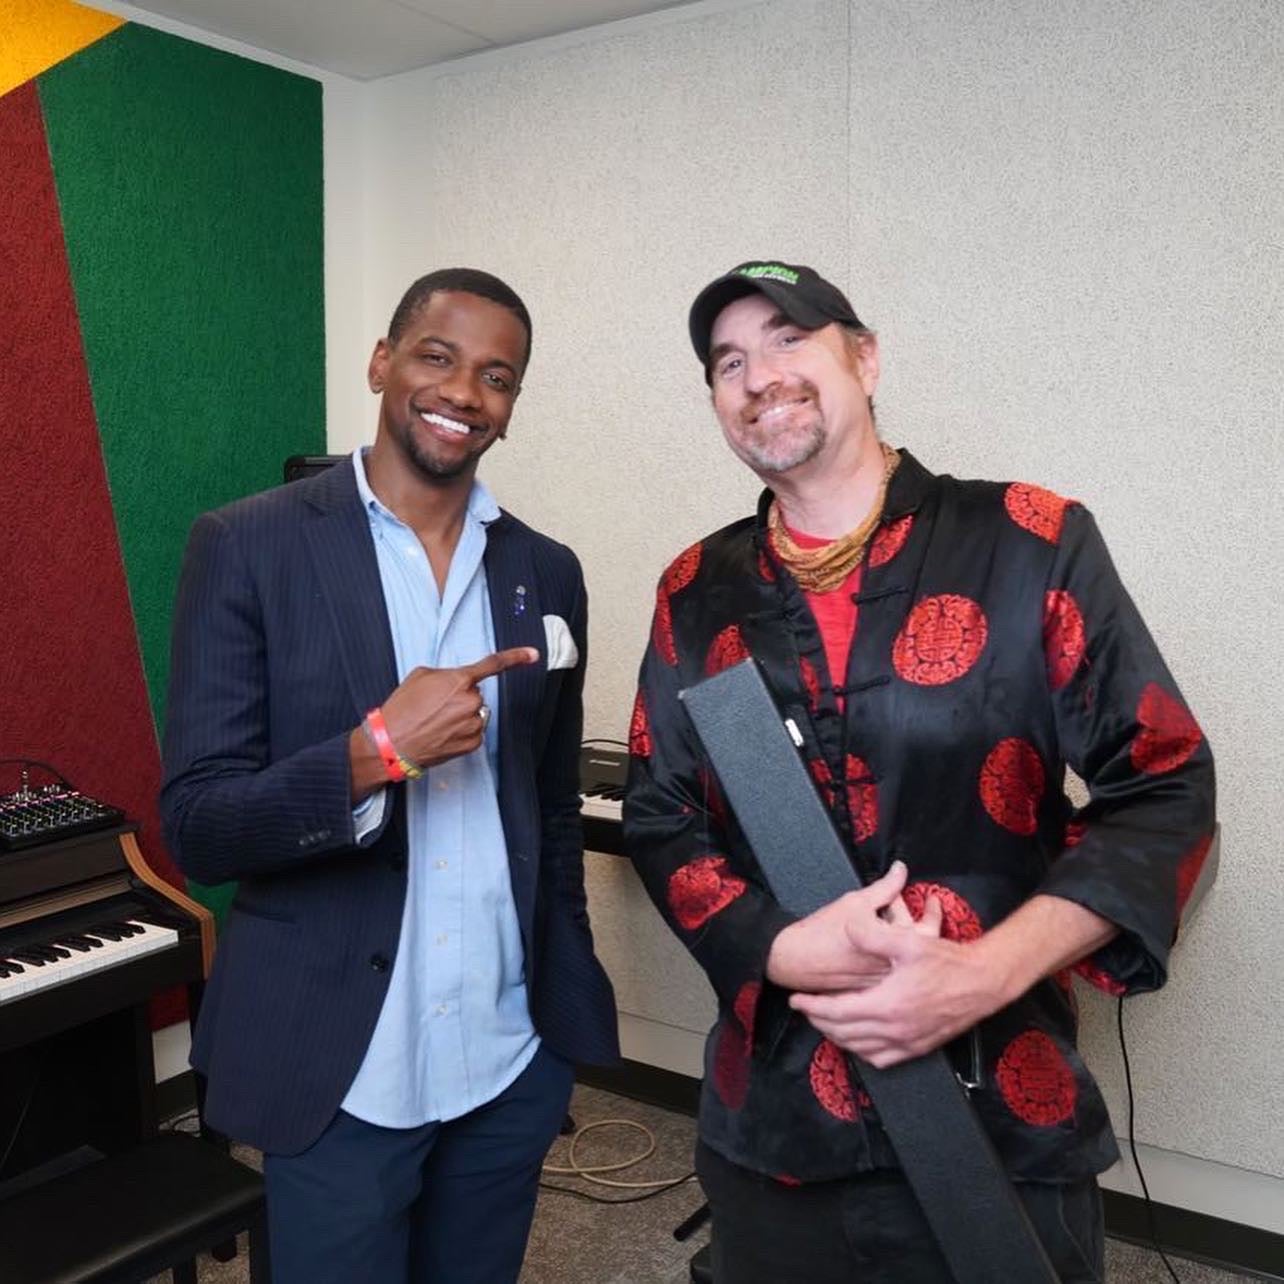 David McKinzie with Dave Egger, a professional cellist who writes for bands like Coldplay